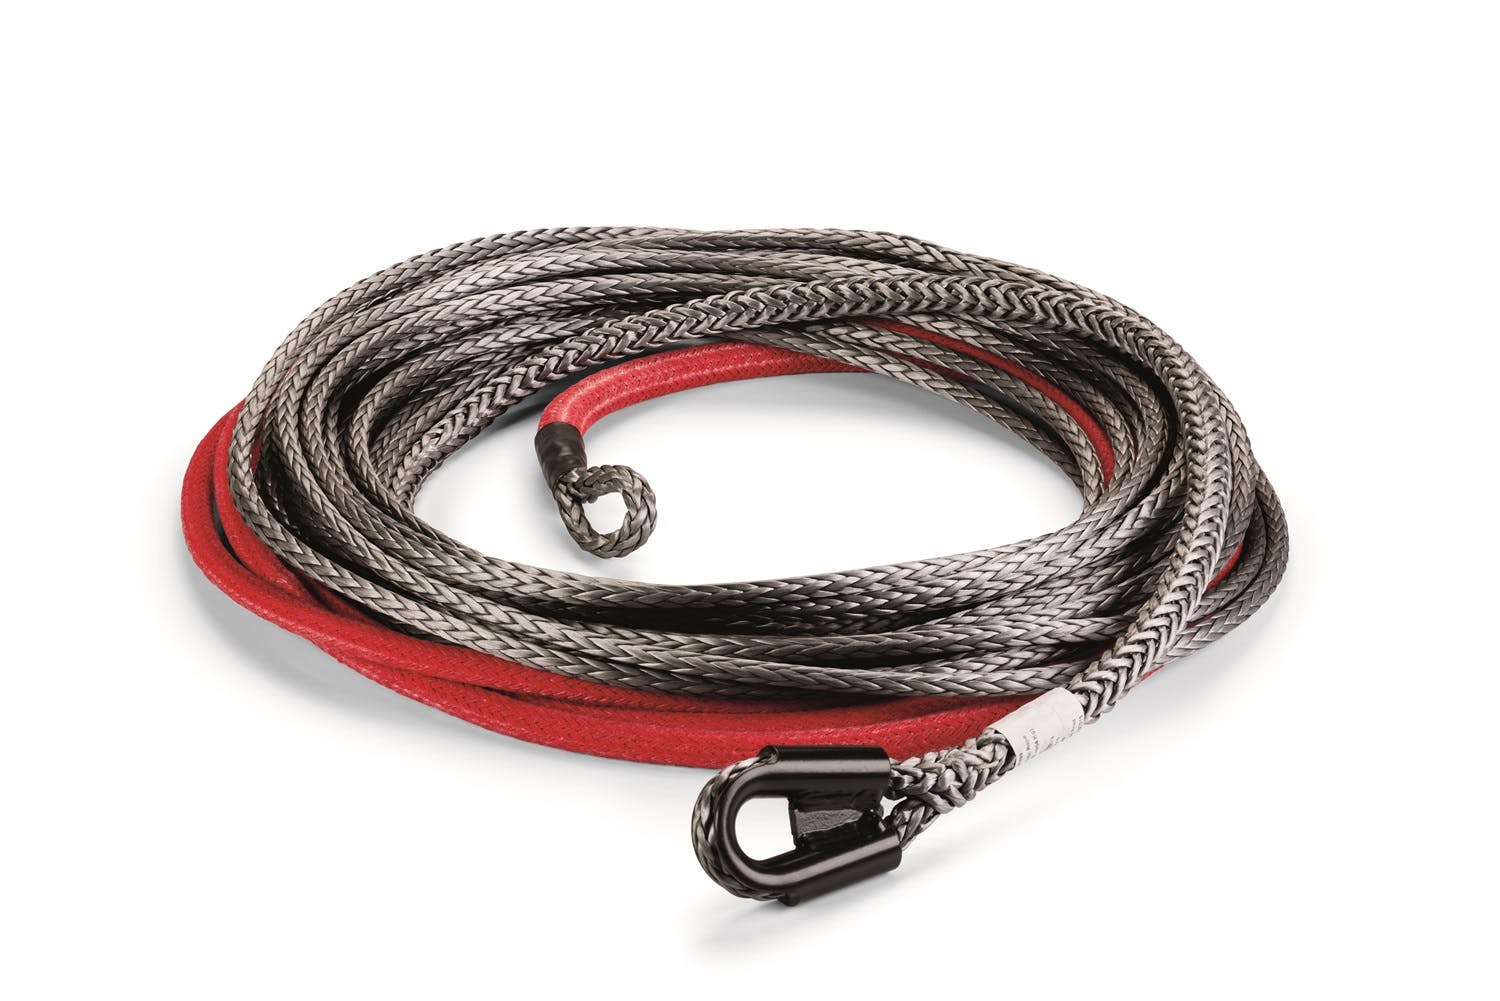 WARN 93120 Standard Duty and Spydura® Synthetic Rope and Extensions